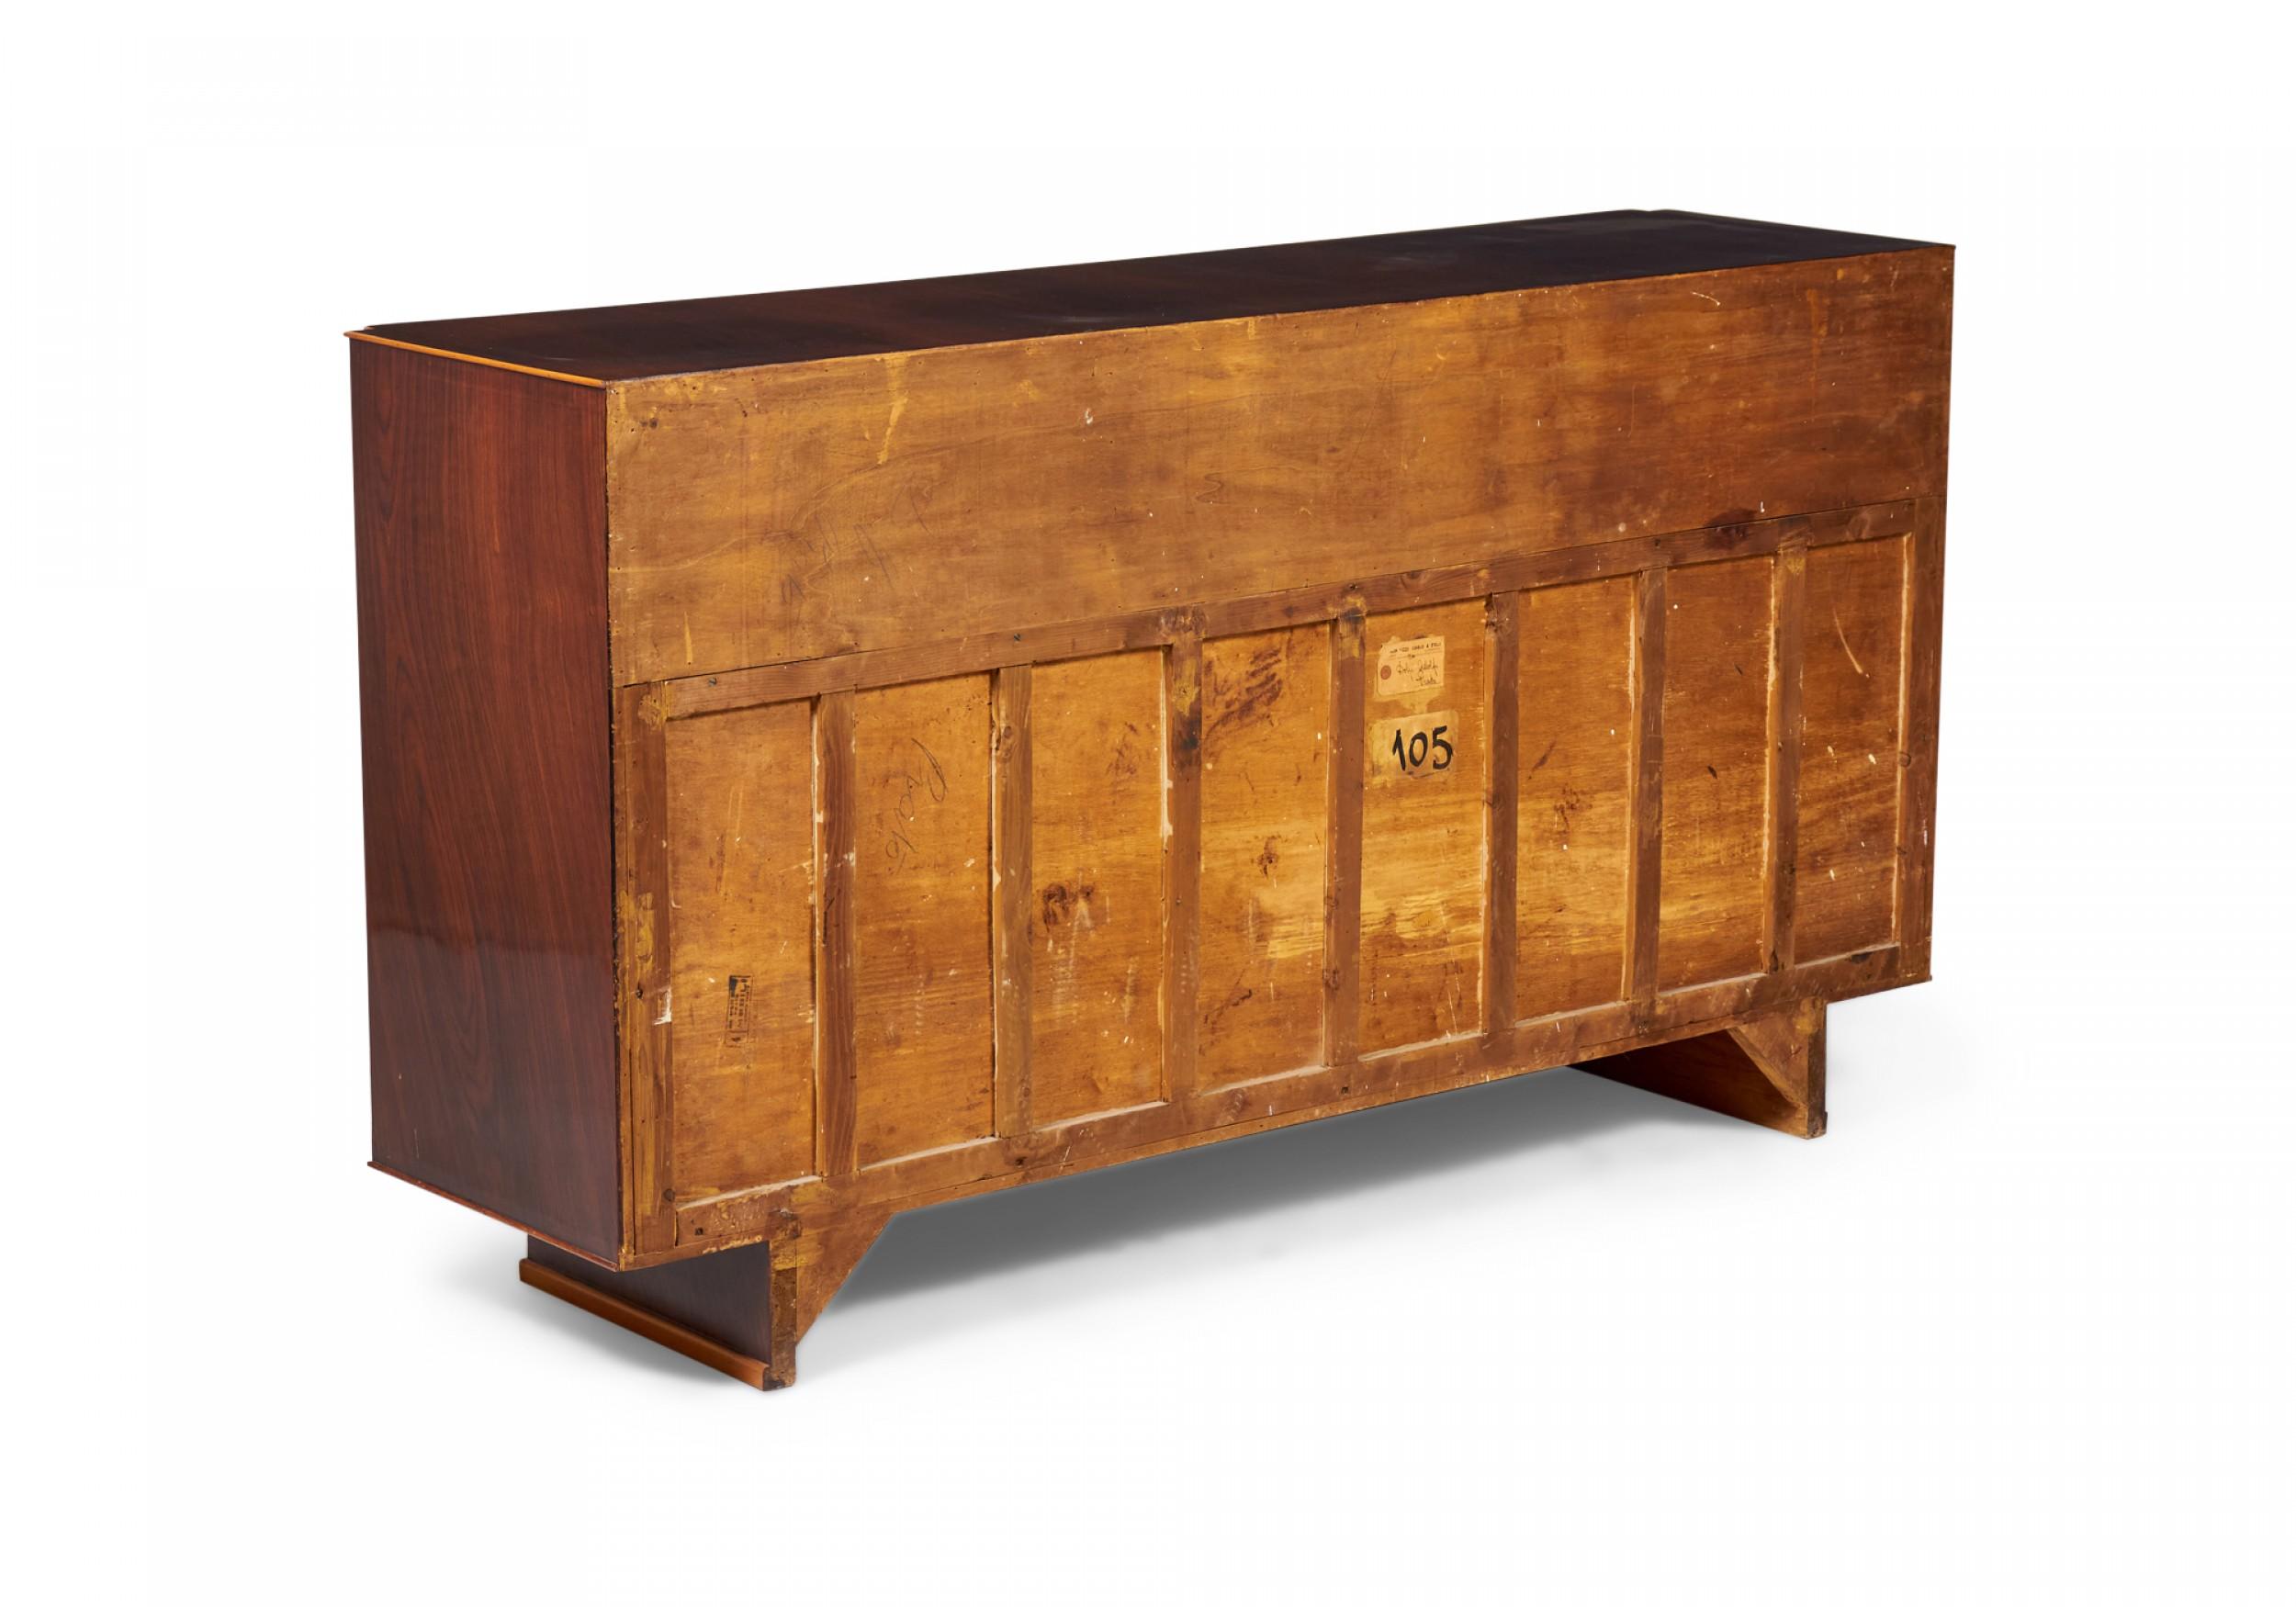 Italian Art Deco Rosewood and Parchment Veneer Credenza 'Manner of Borsani' For Sale 5